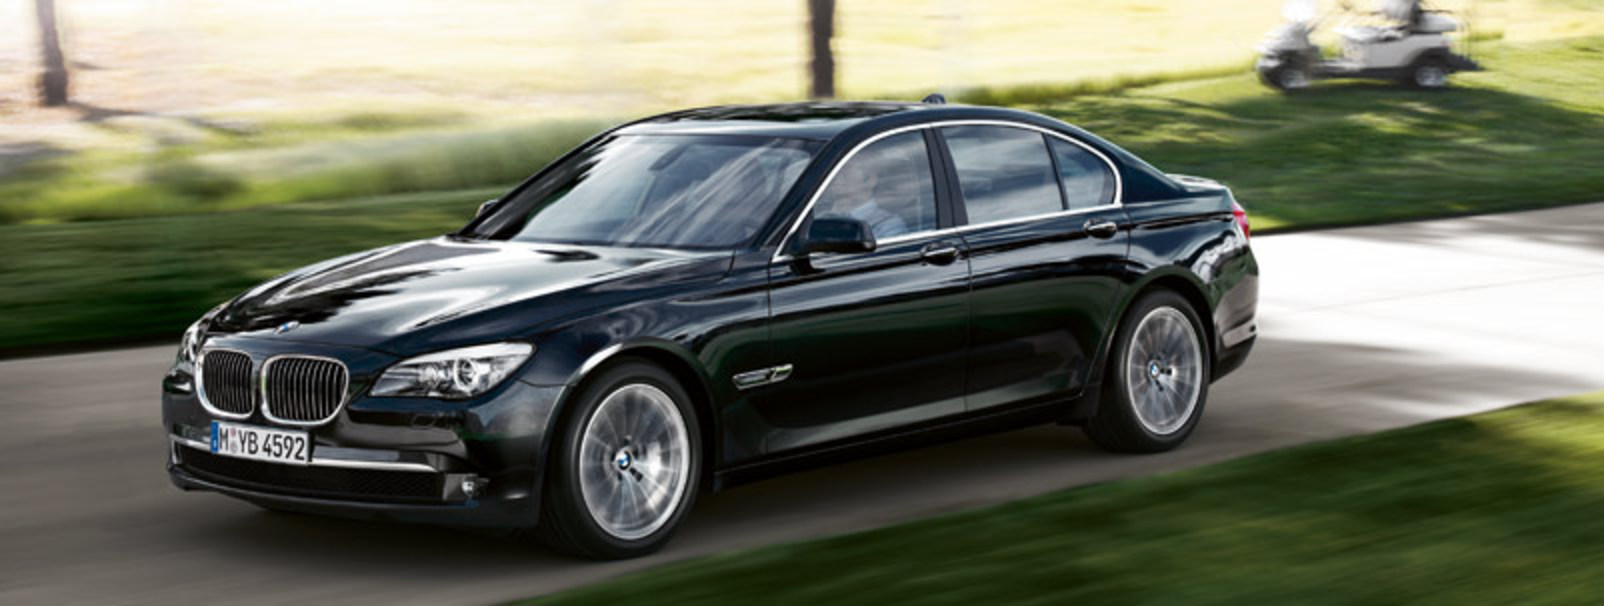 on the BMW 730d. Normal tyres are constantly flexed during use,